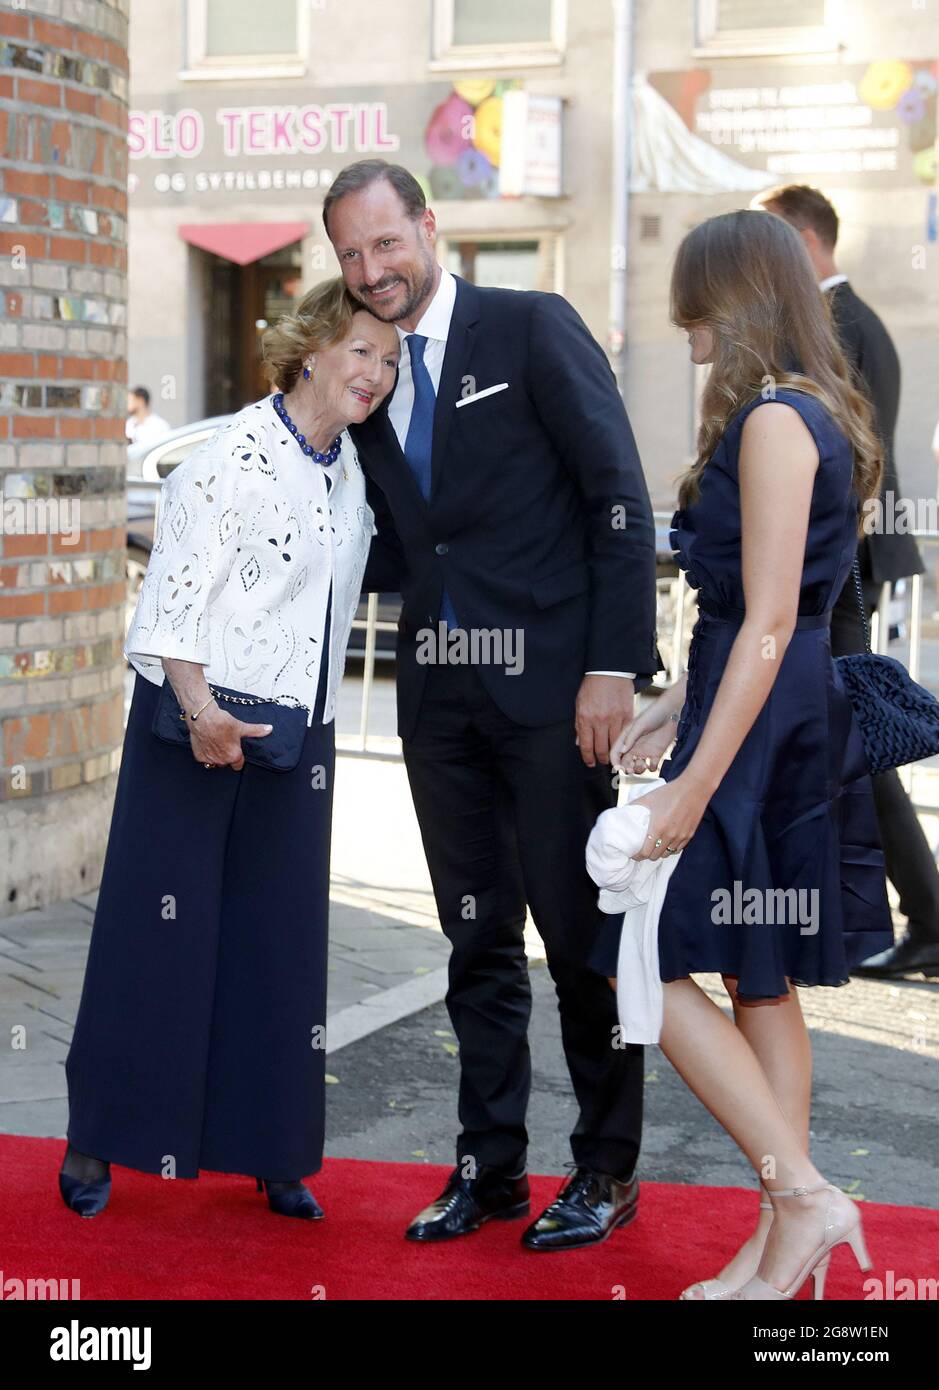 Oslo, Norway. 22nd July, 2021. Queen Sonja, Crown Prince Haakon and Princess Ingrid Alexandra of Norway attend the national memorial ceremony 10 years after Utoya terror attack on 22 July 2011. Oslo, Norway, July 22, 2021. Photo by Marius Gulliksrud/Stella Pictures/ABACAPRESS.COM Credit: Abaca Press/Alamy Live News Stock Photo